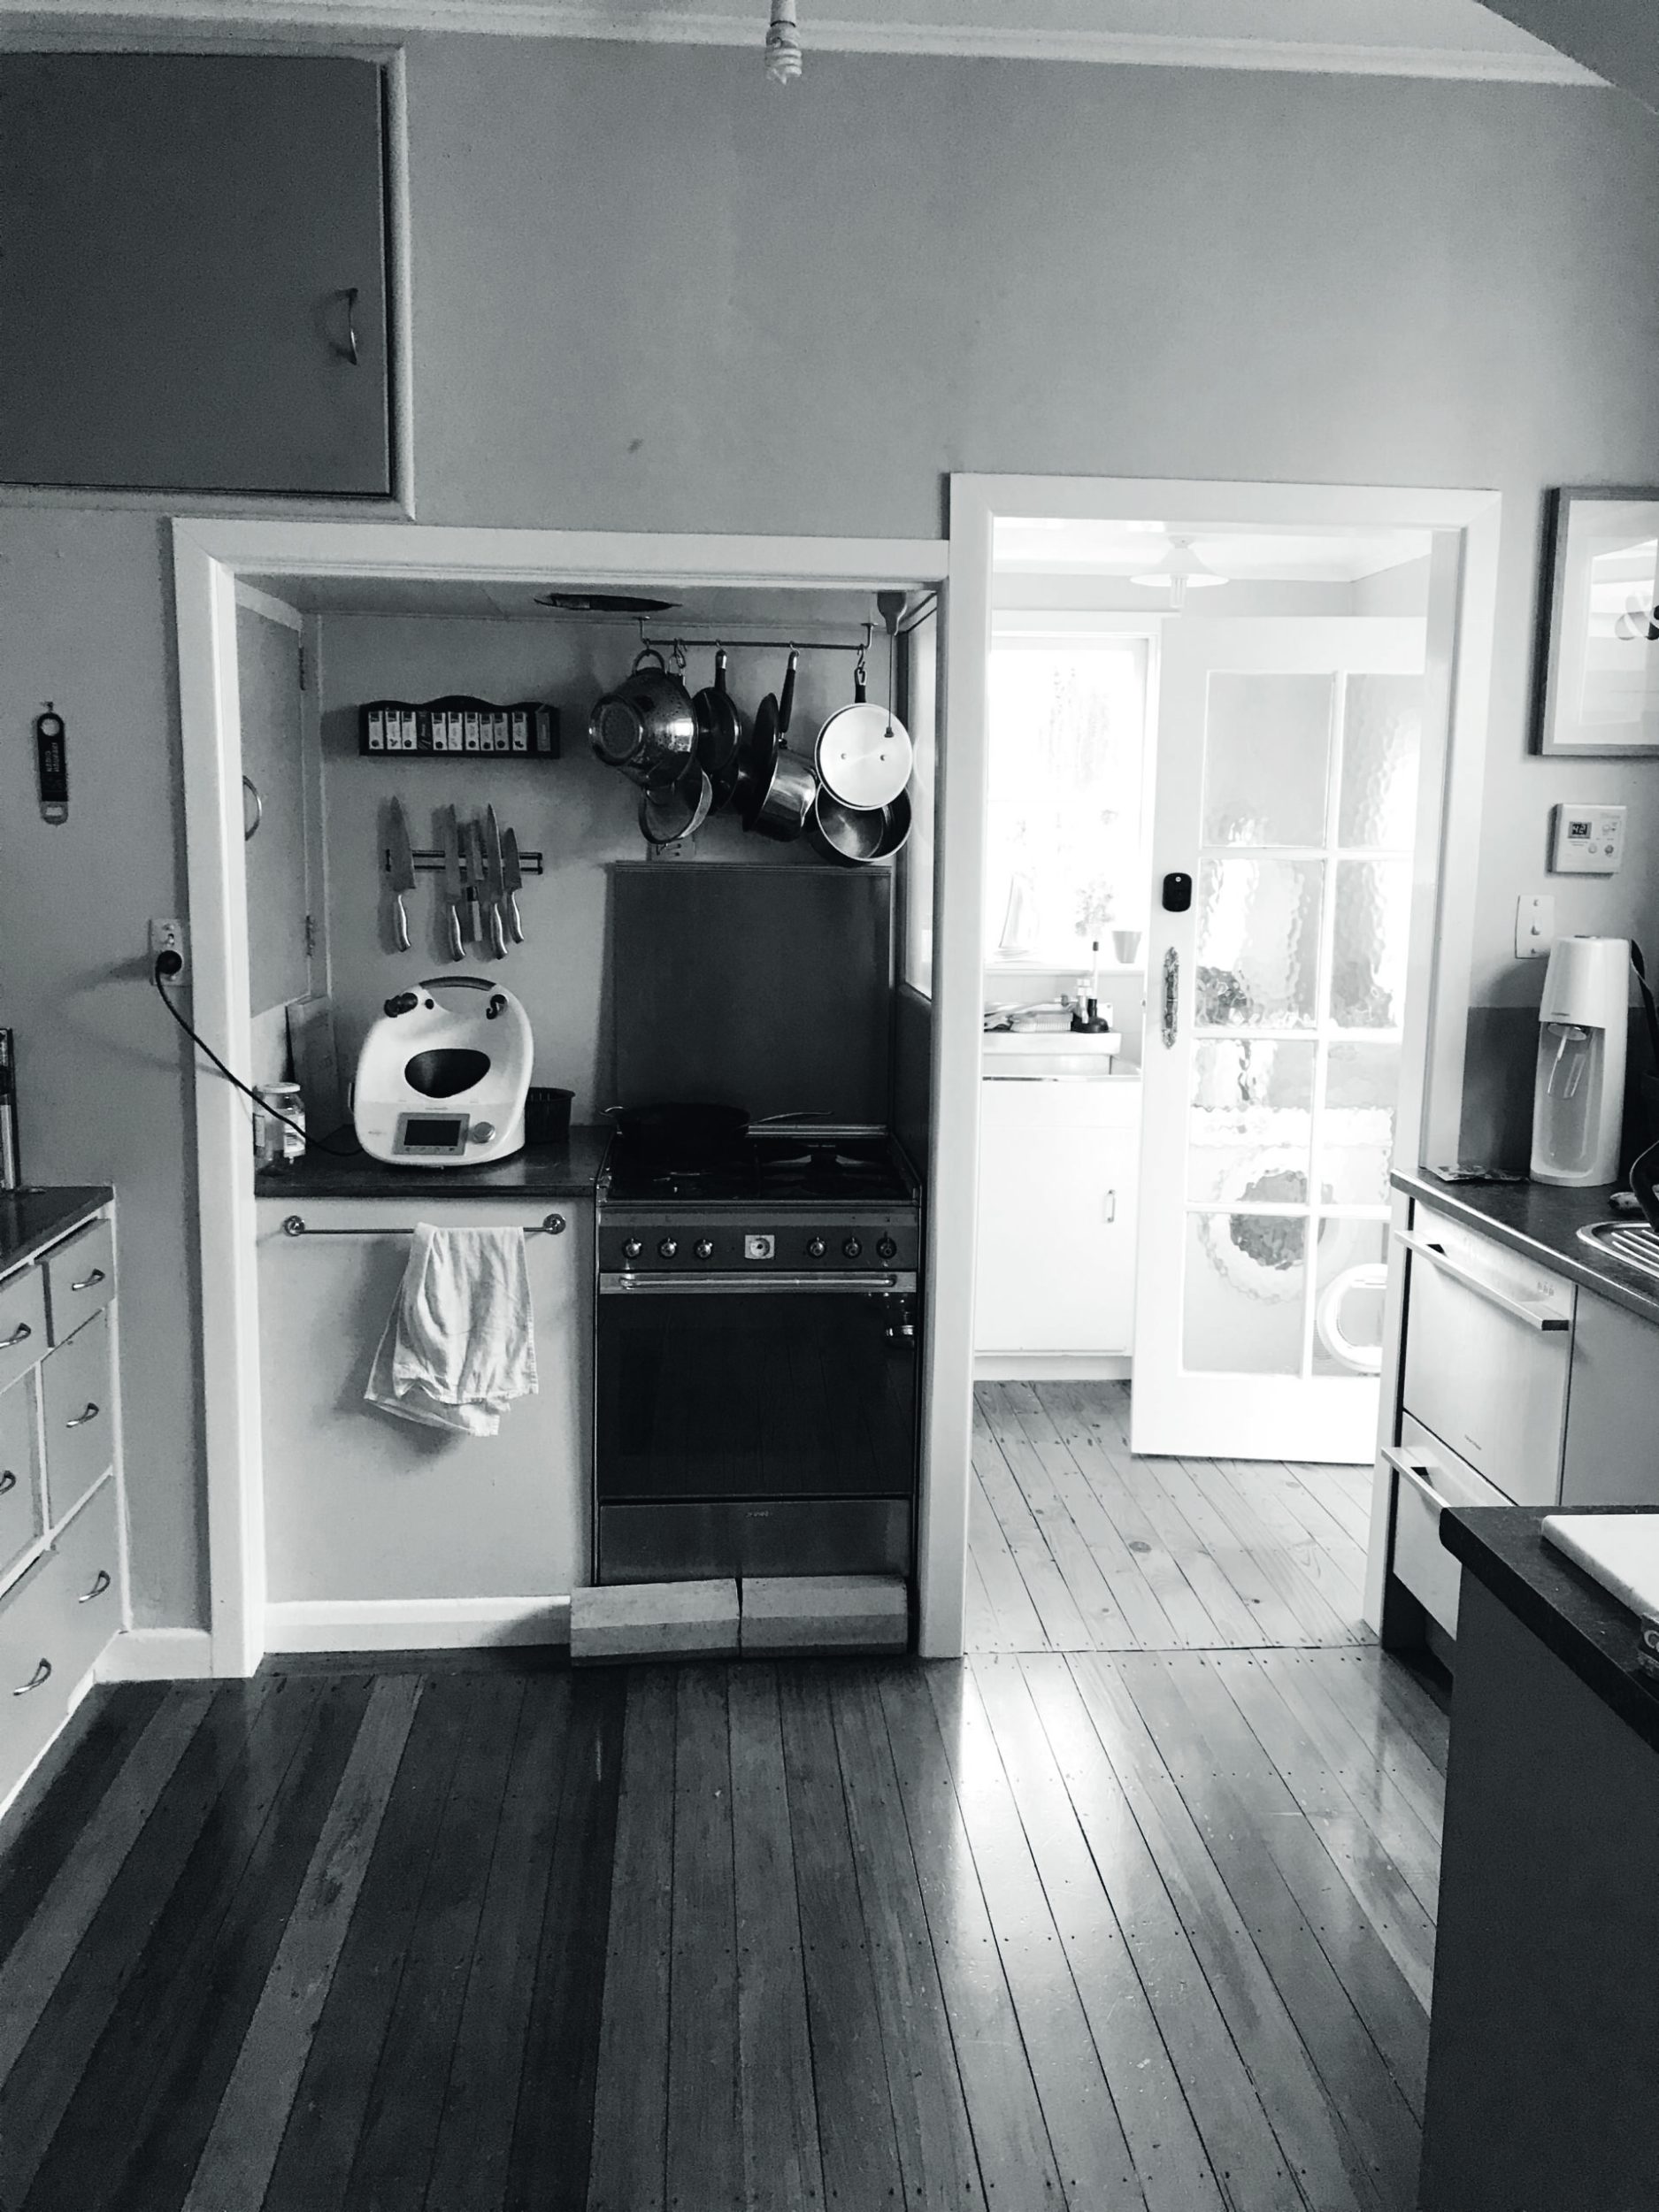 Black and white photo of an old kitchen